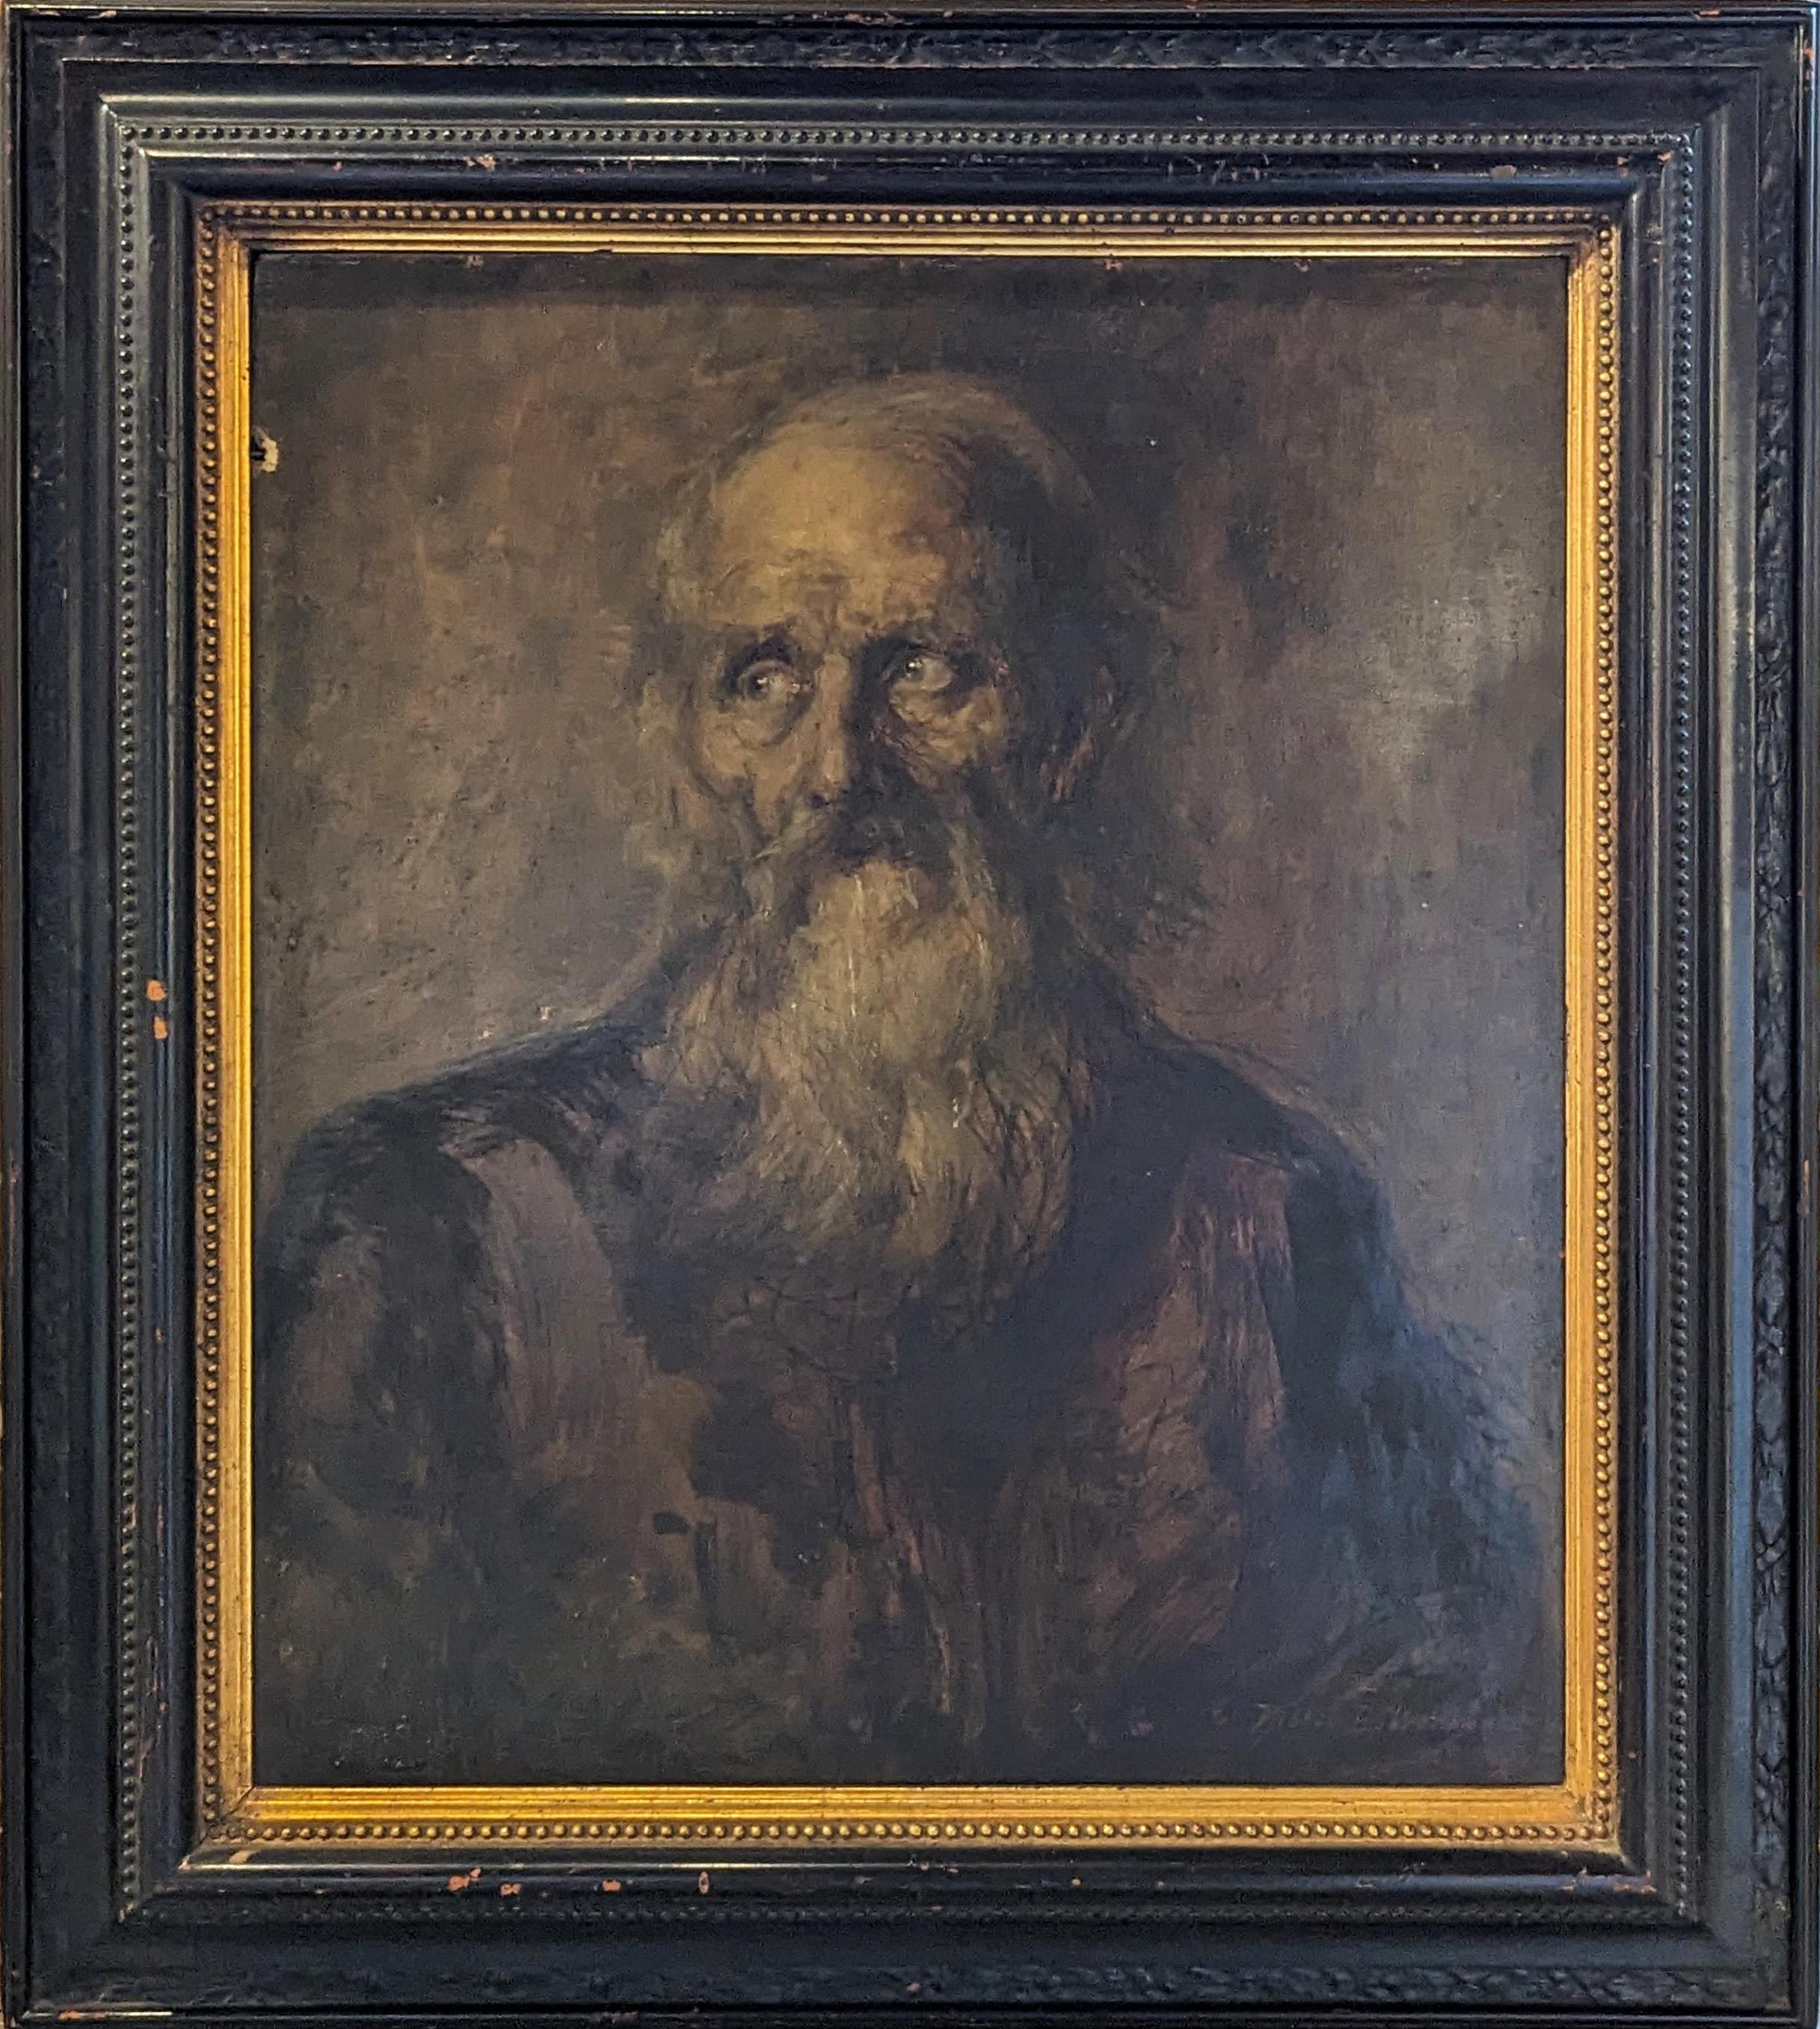 Violet B. Wenner Figurative Painting - "Study of Old Man" Early Naturalistic Figurative Portrait Oil Painting